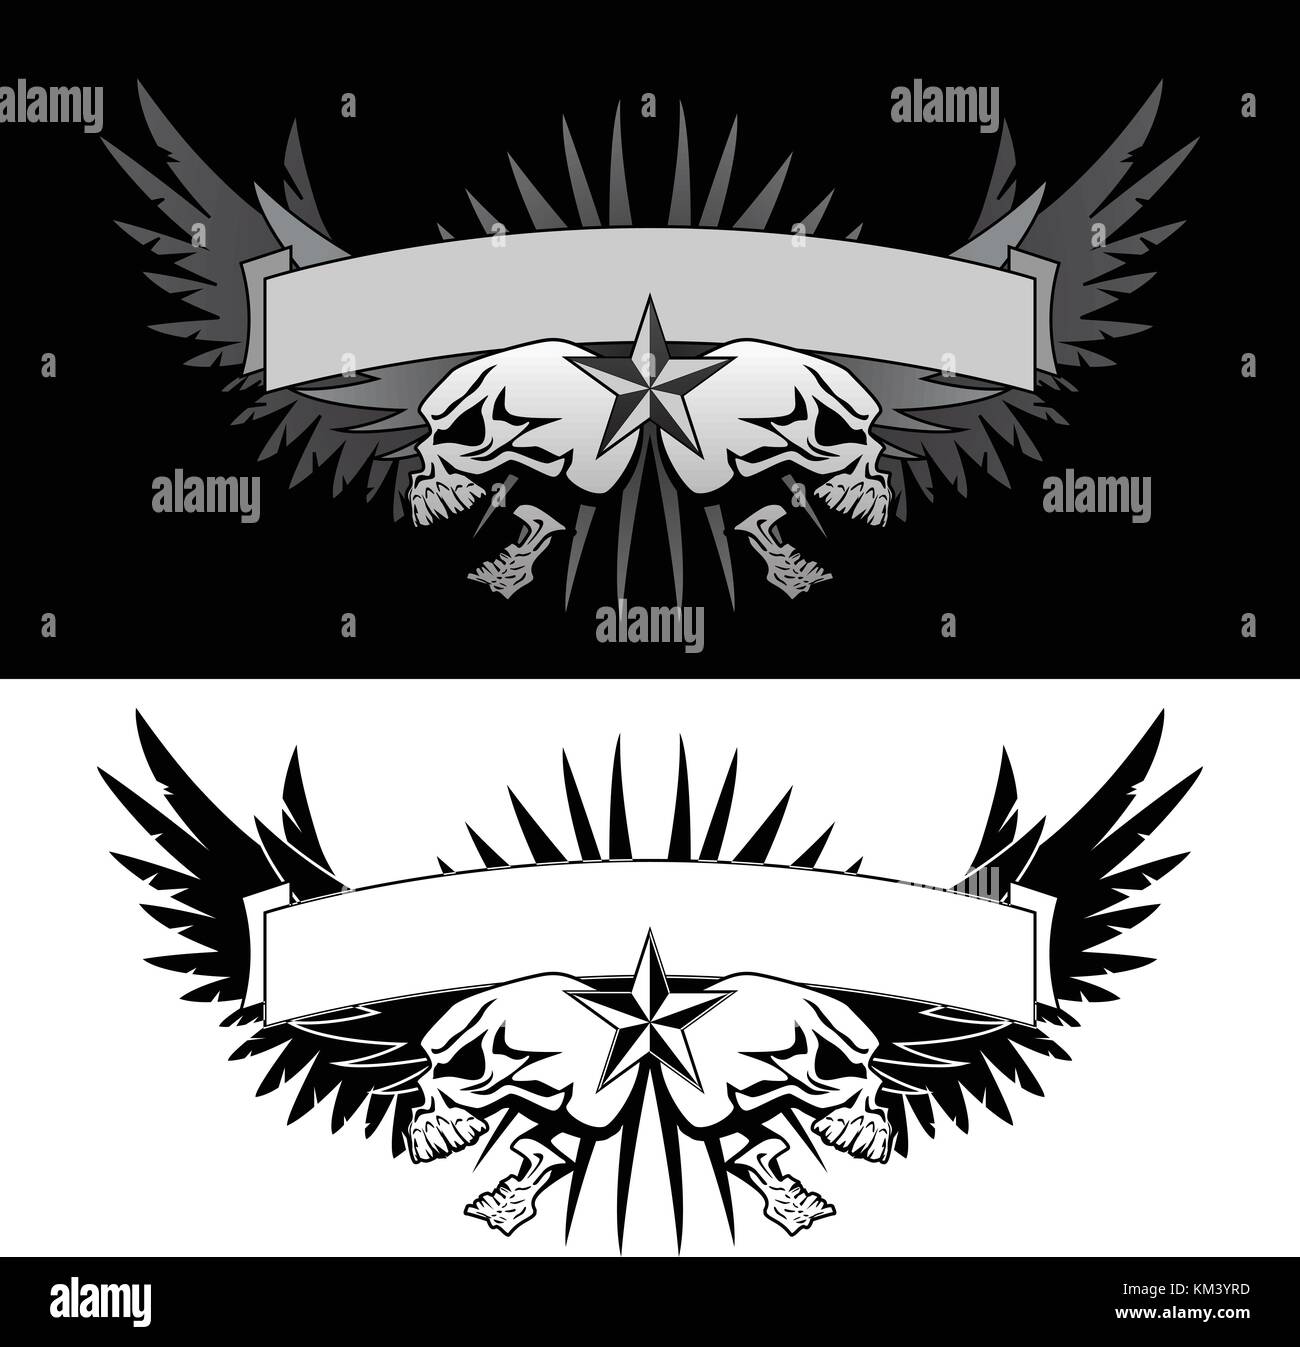 Skull wings with banner tattoo style vector graphic Stock Vector